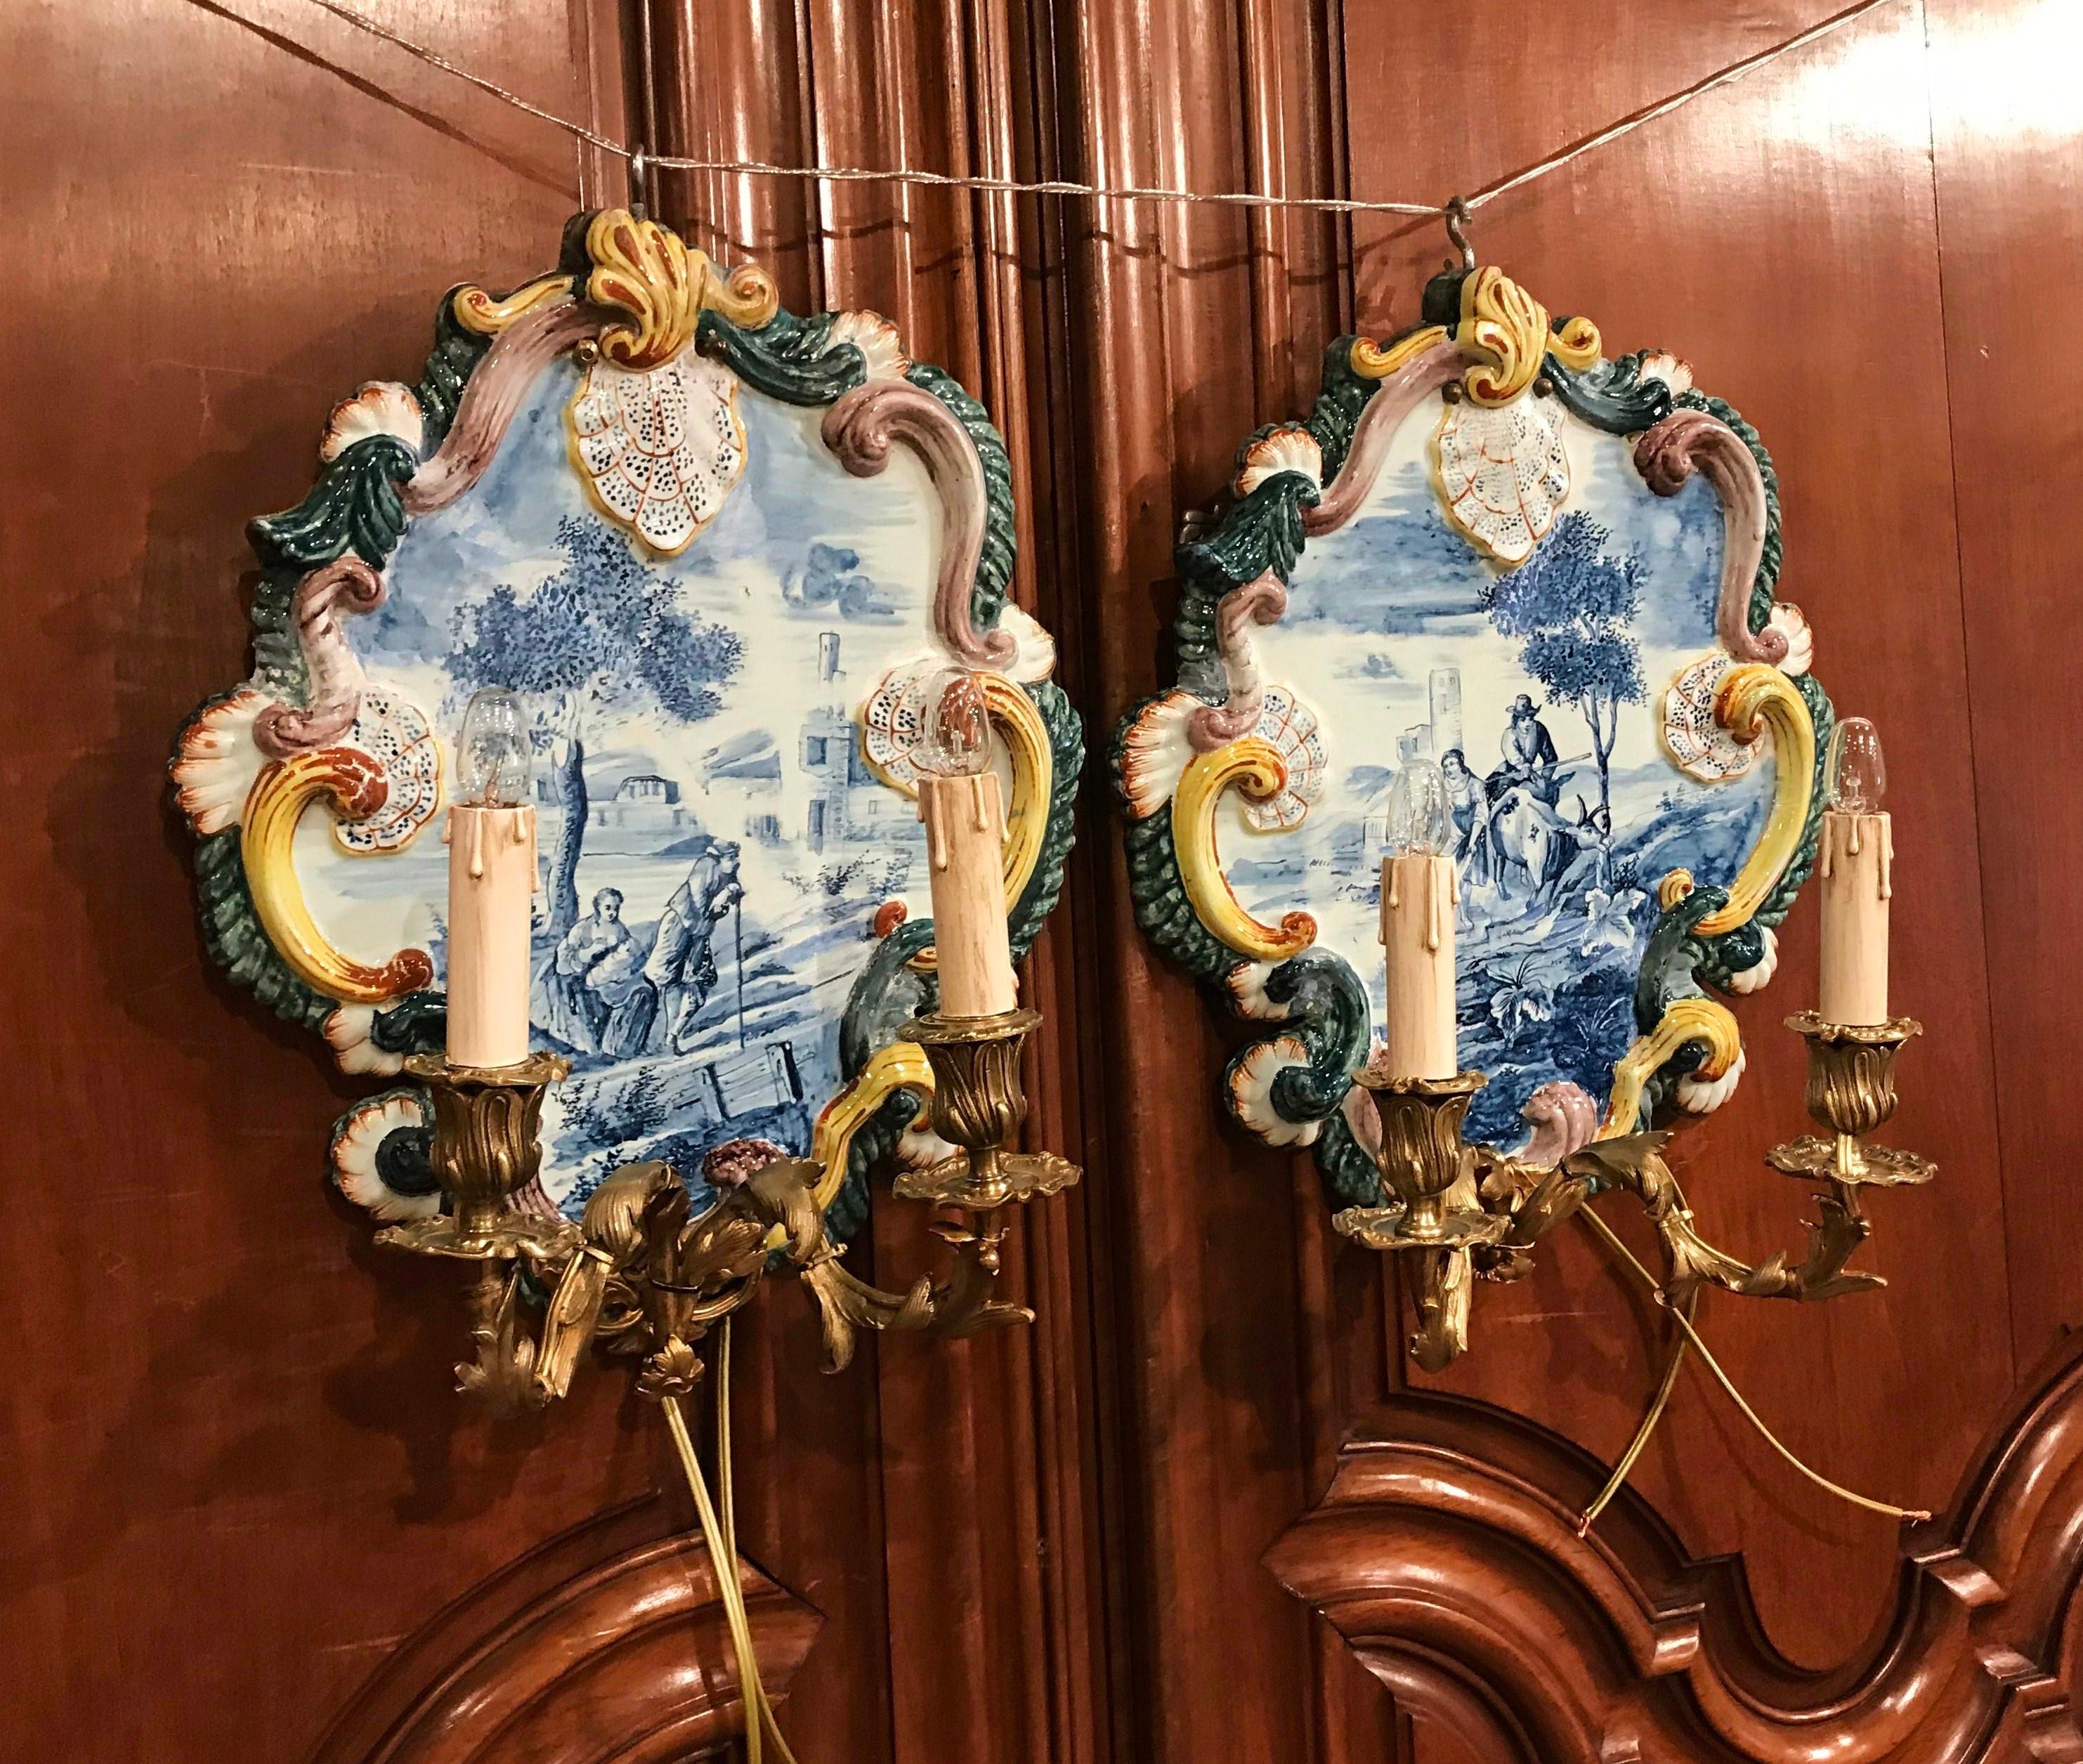 Decorate a living room or dining room with this colorful pair of antique wall sconces. Crafted in France circa 1820, each Louis XV style light fixture is decorated with two bronze scroll arms with leaf decor. The base of each sconce is a colorful